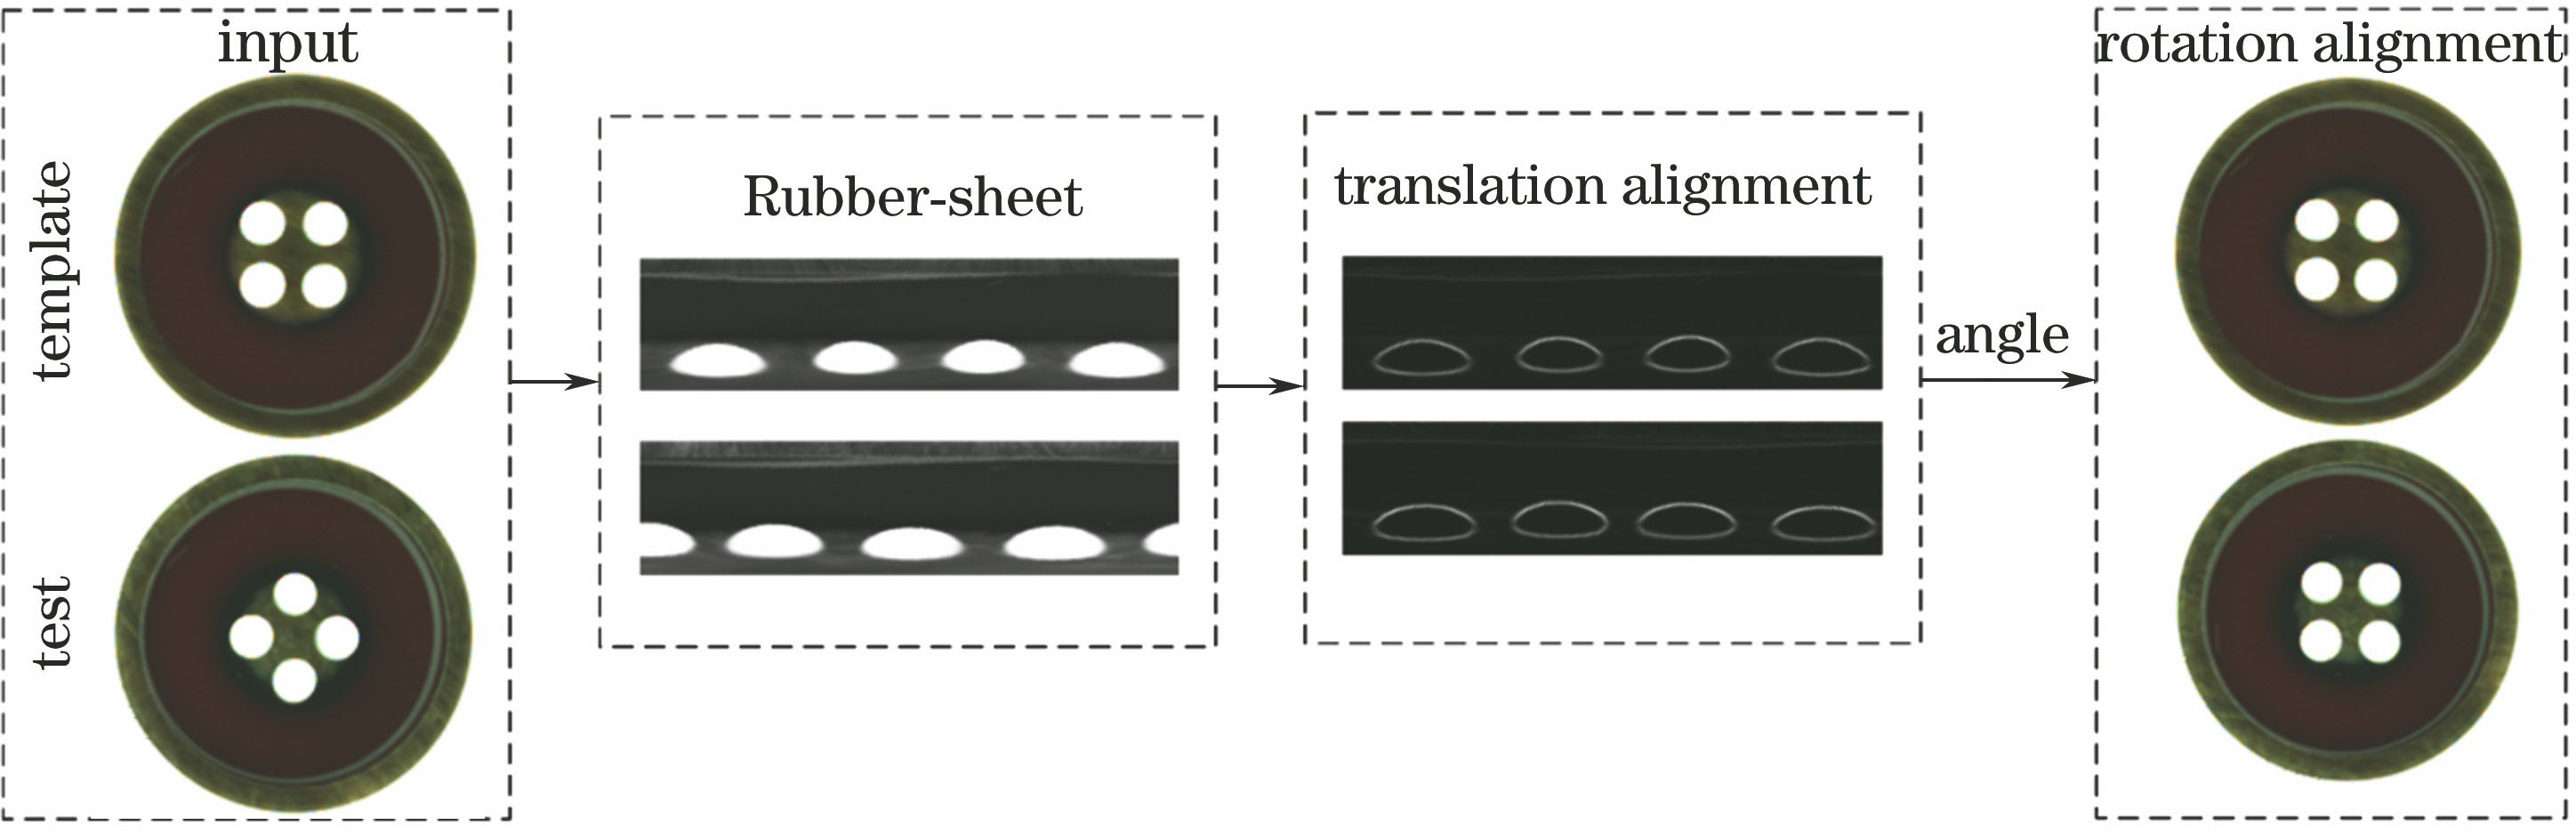 Flow chart of image preprocessing and its effect